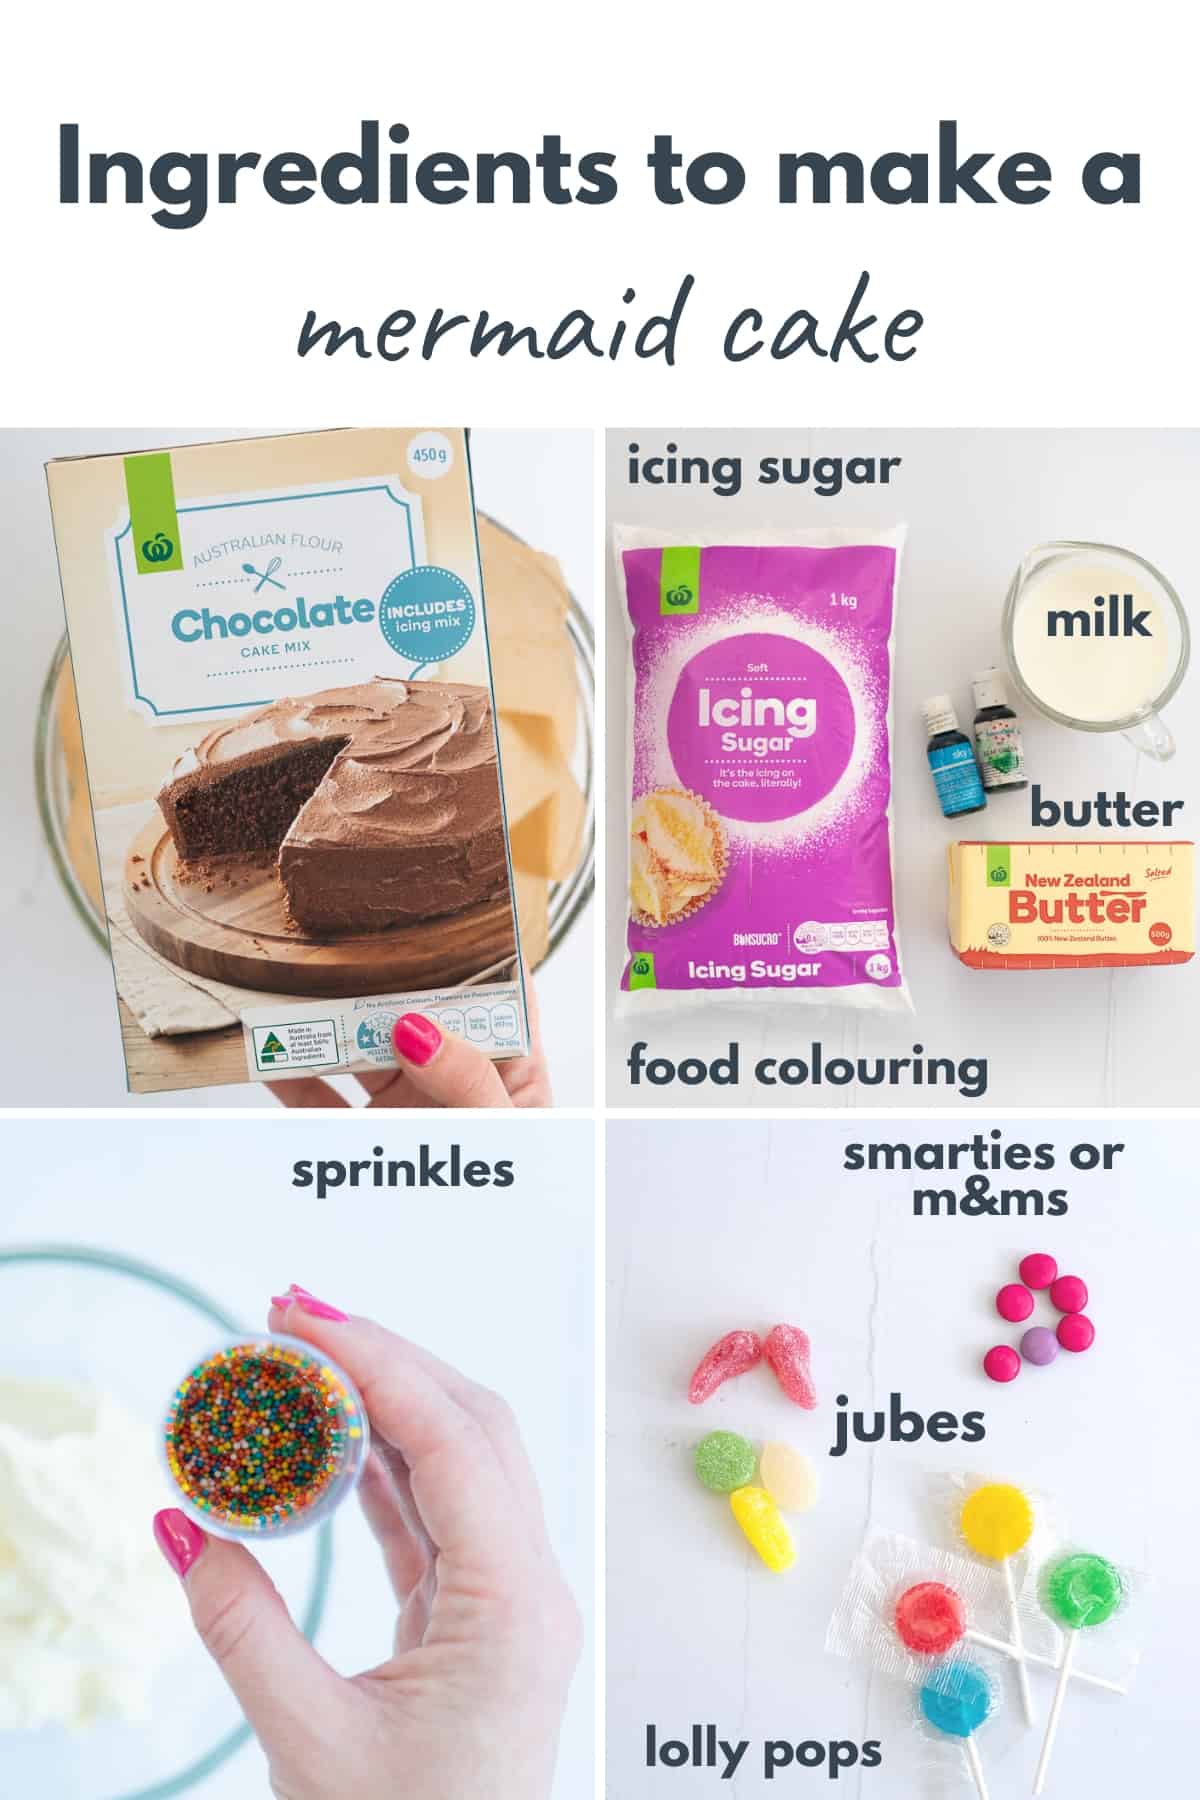 4 photo collage showing the ingredients required to make a mermaid cake